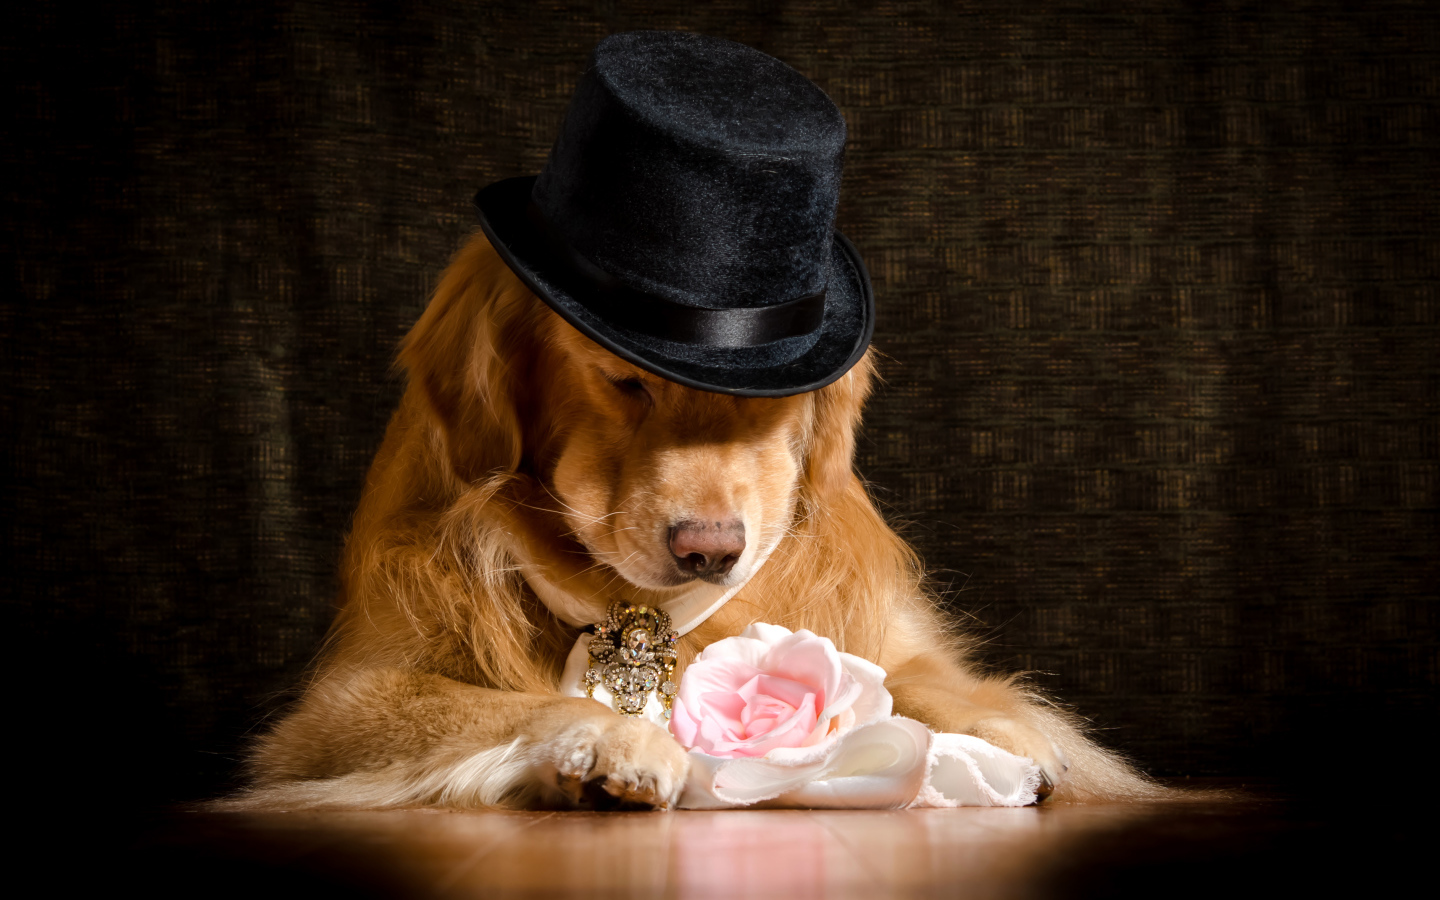 Golden Retriever in a black hat with a pink rose